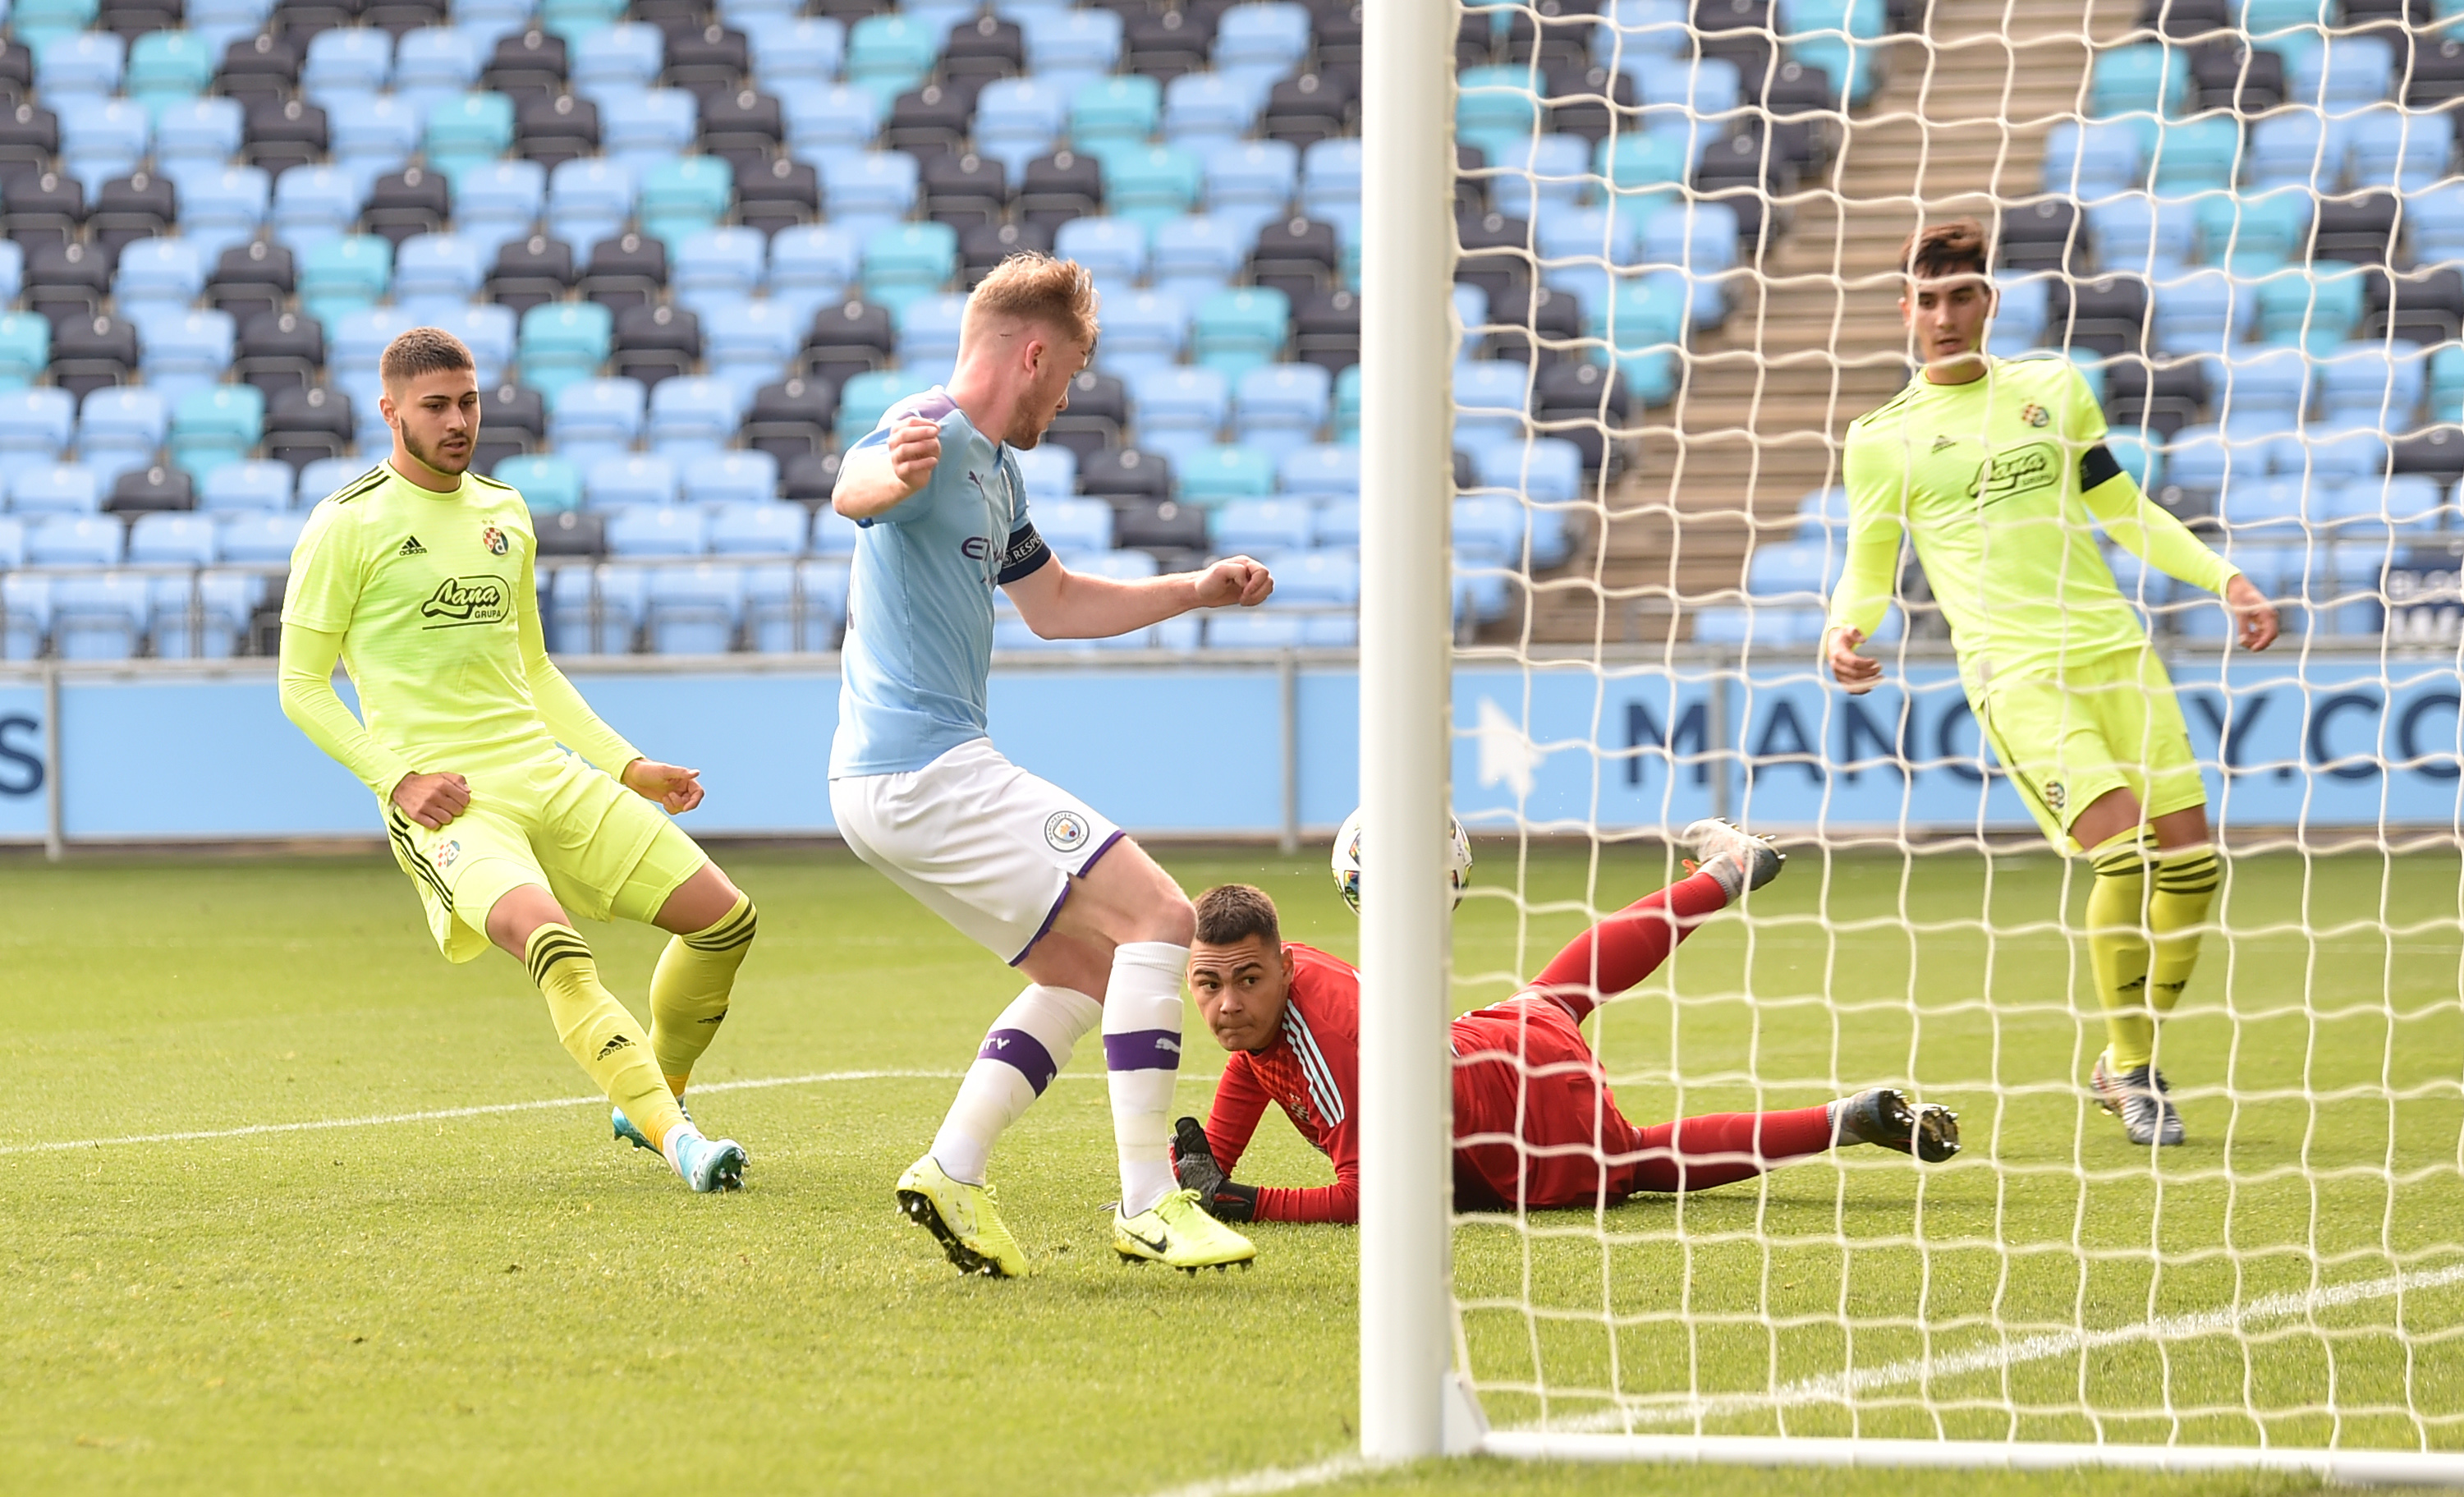 ON TARGET : Tommy Doyle strikes to fire City ahead